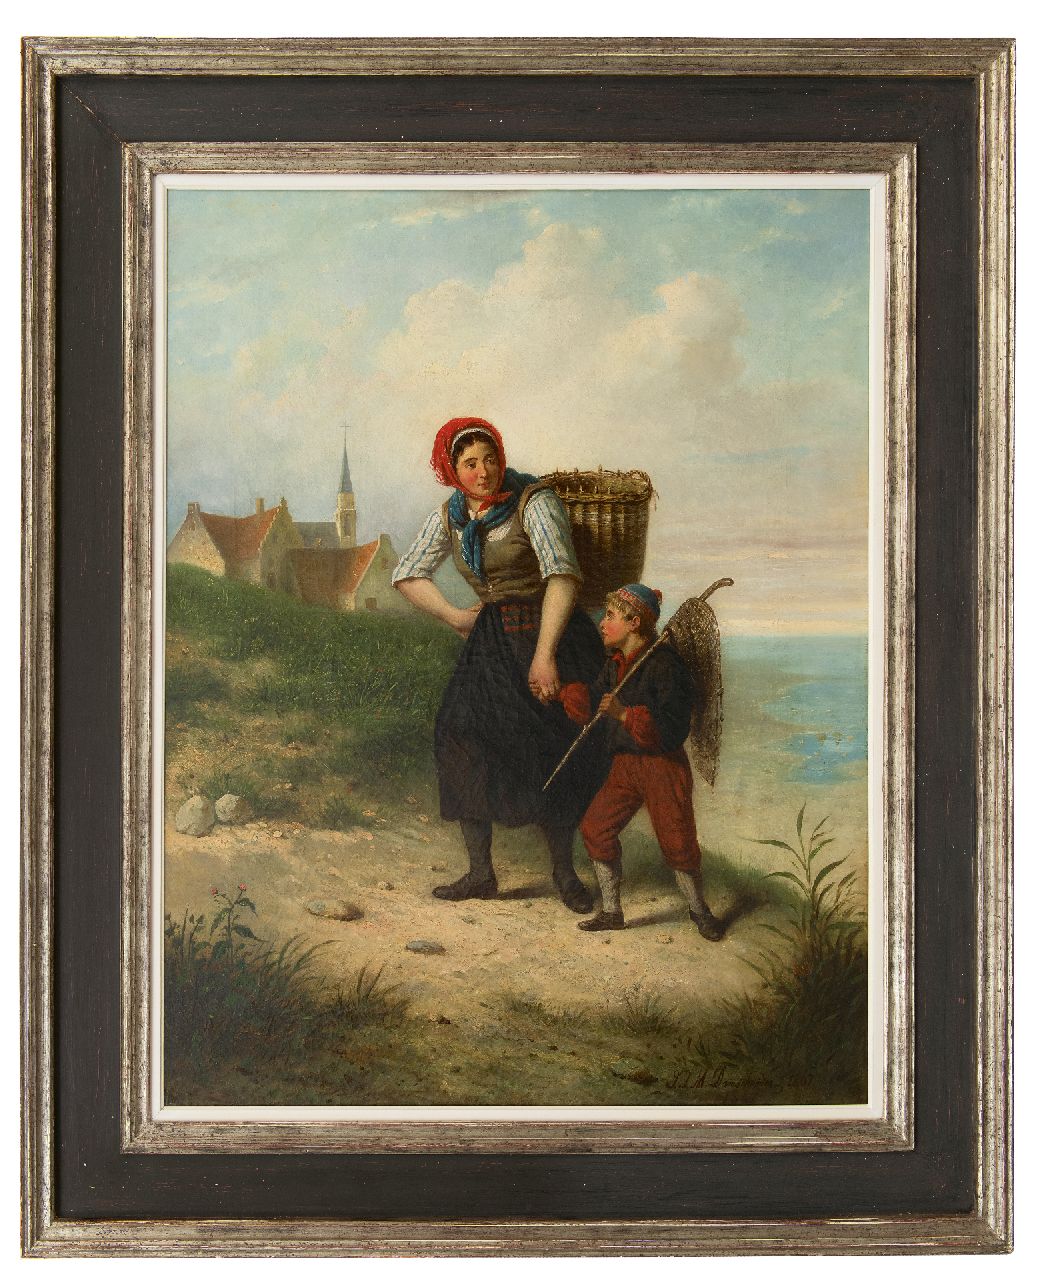 Damschreuder J.J.M.  | Jan Jacobus Matthijs Damschreuder | Paintings offered for sale | A fisherman's wife with her child in the dunes, oil on canvas 93.6 x 71.1 cm, signed l.r. and dated 1867